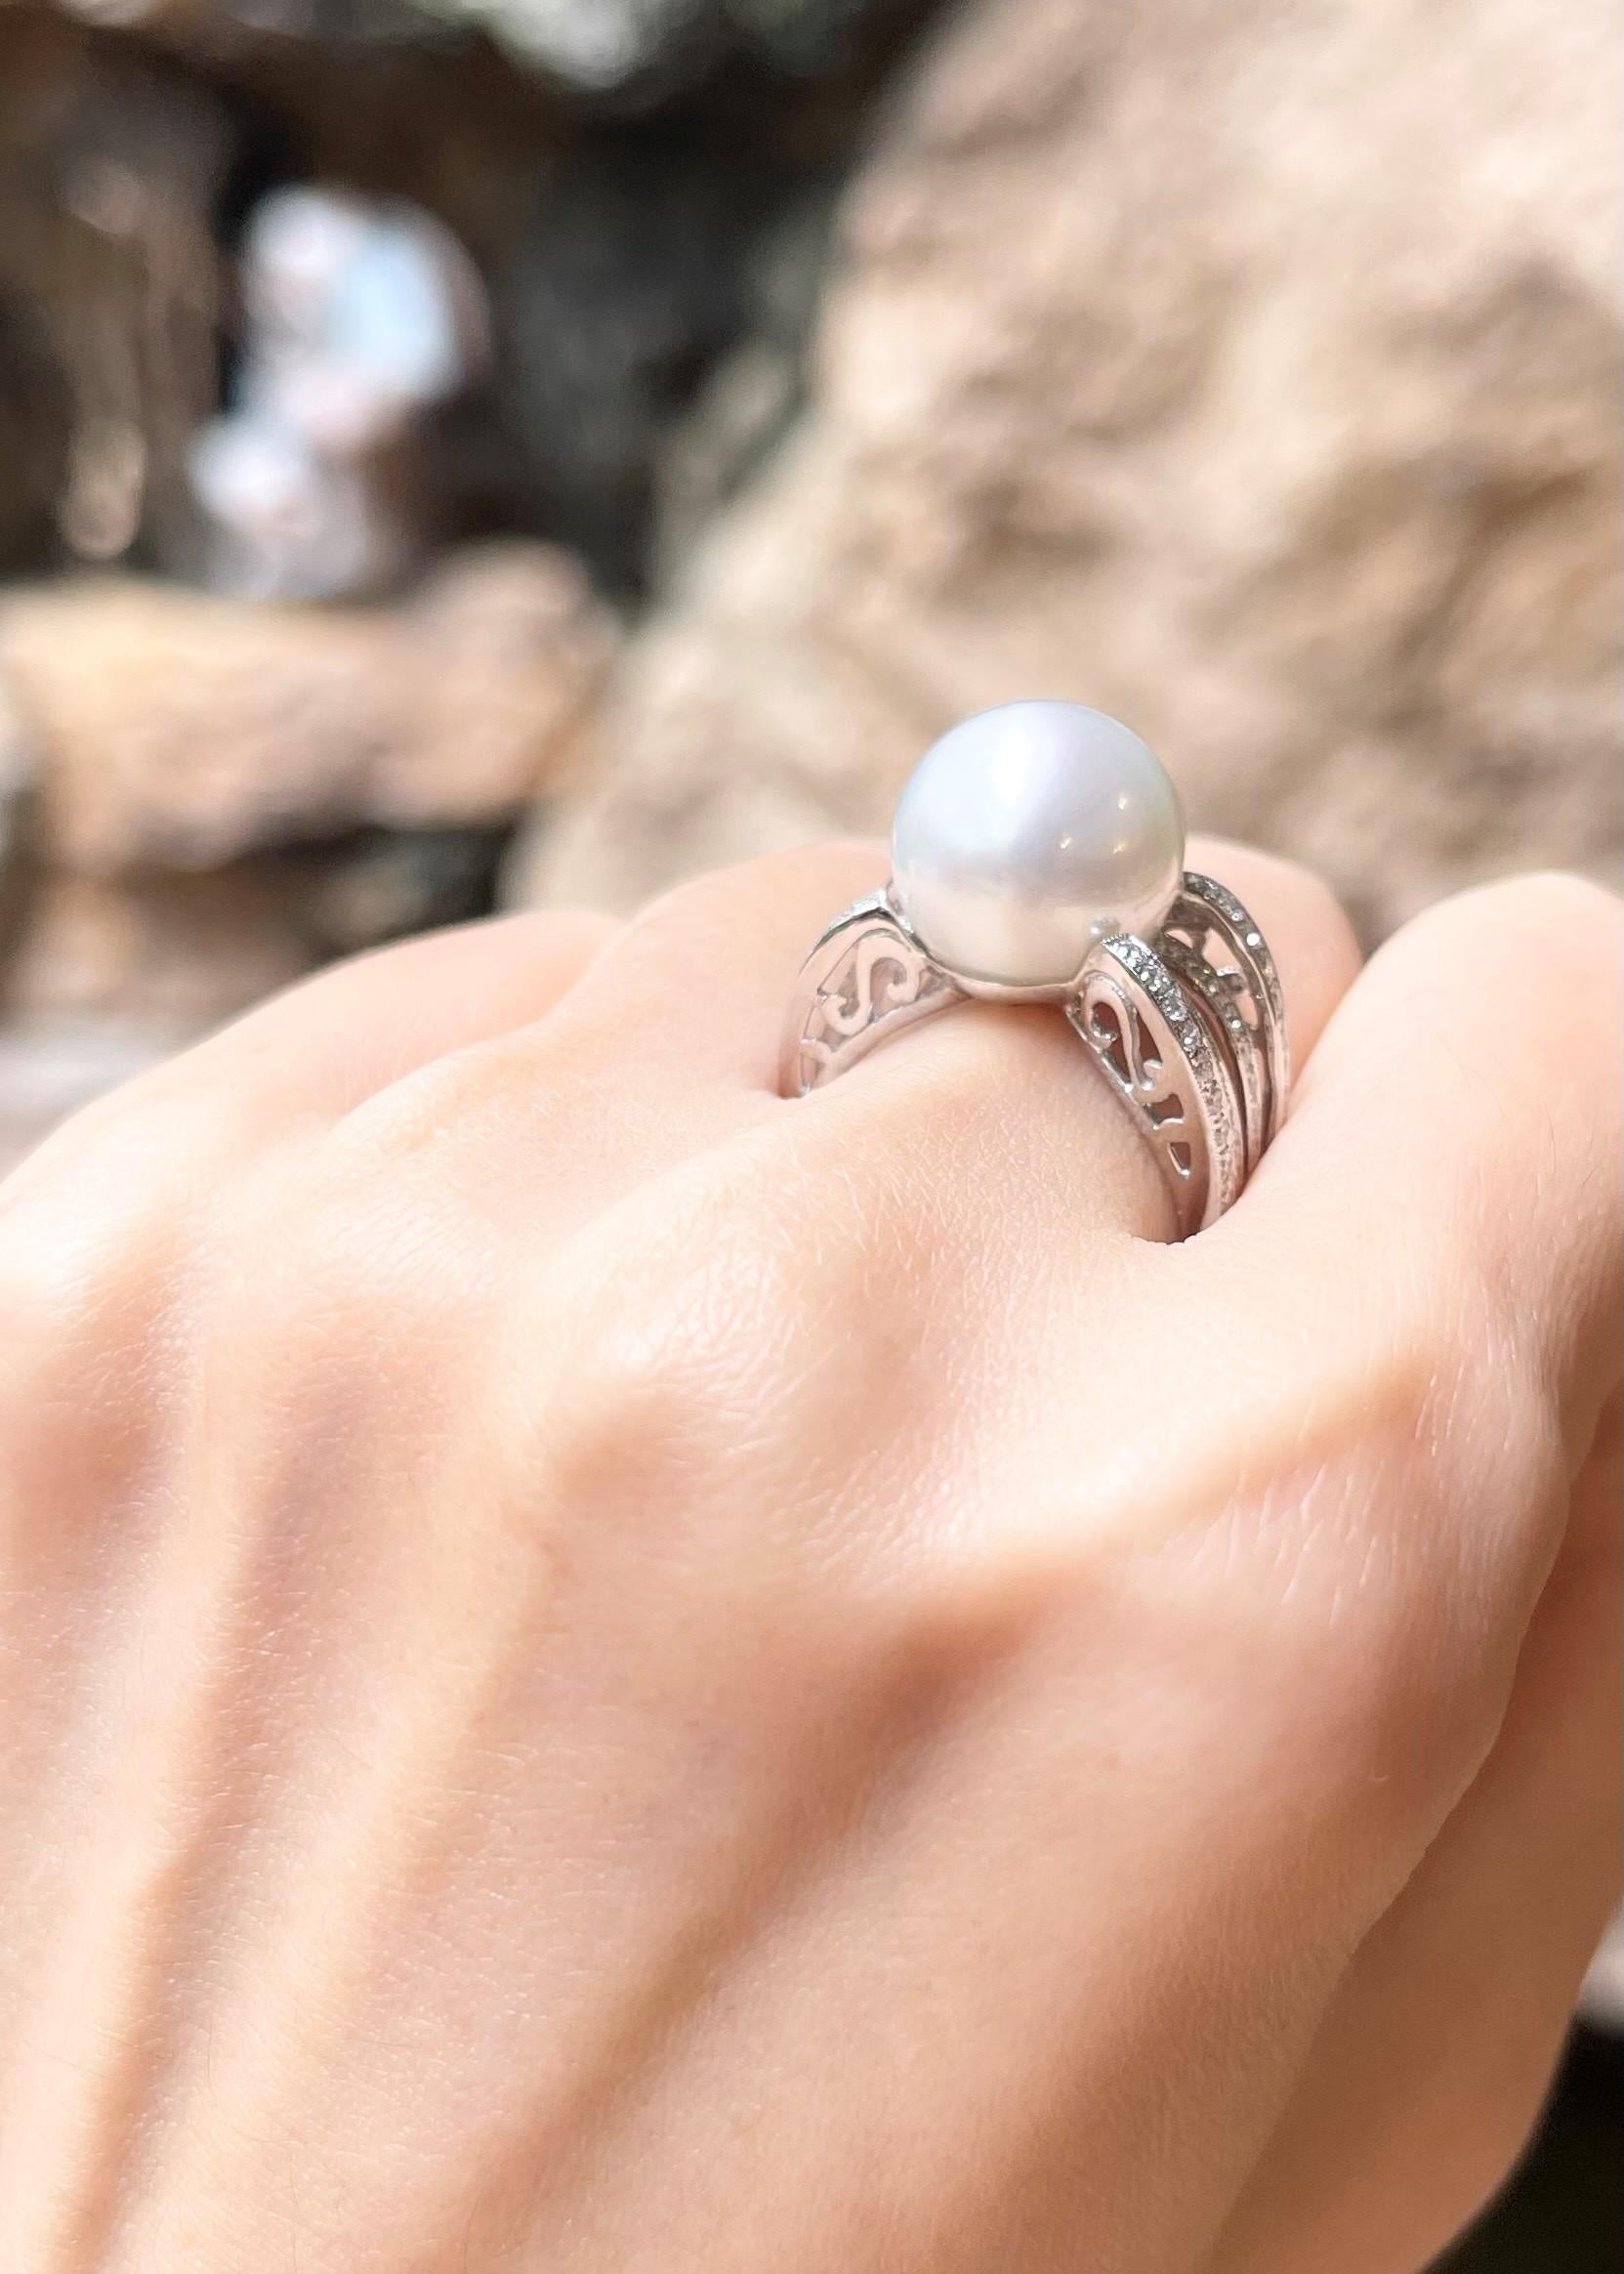 South Sea Pearl with Diamond 0.54 carat Ring set in 18K White Gold Settings

Width:  2.1 cm 
Length: 1.2 cm
Ring Size: 54
Total Weight: 9.24 grams

